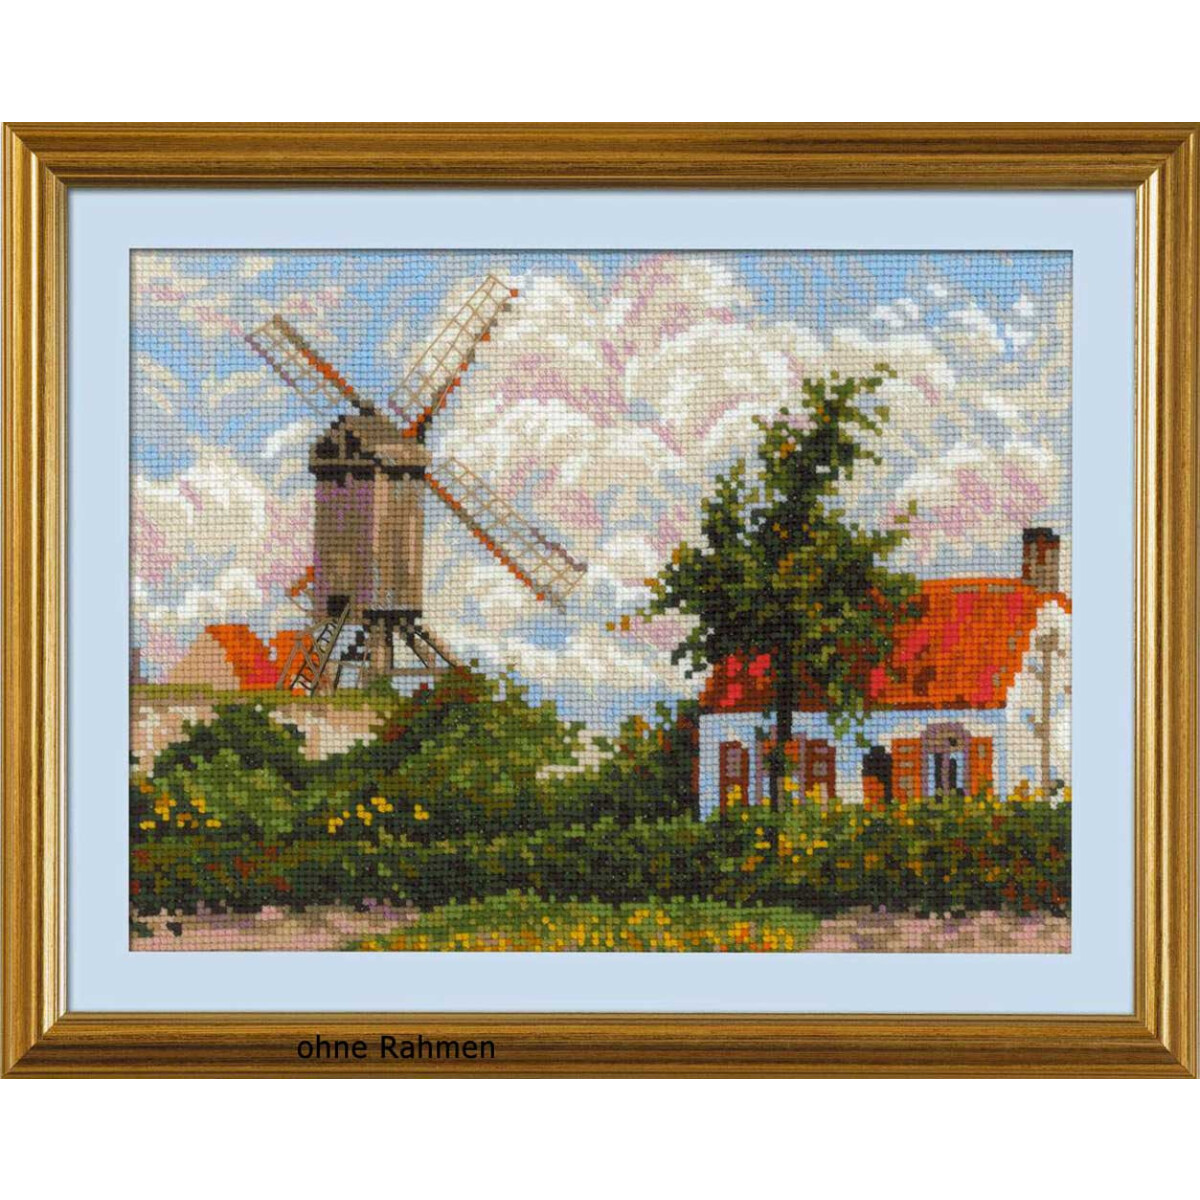 Riolis counted cross stitch Kit Windmill at Knokke after...